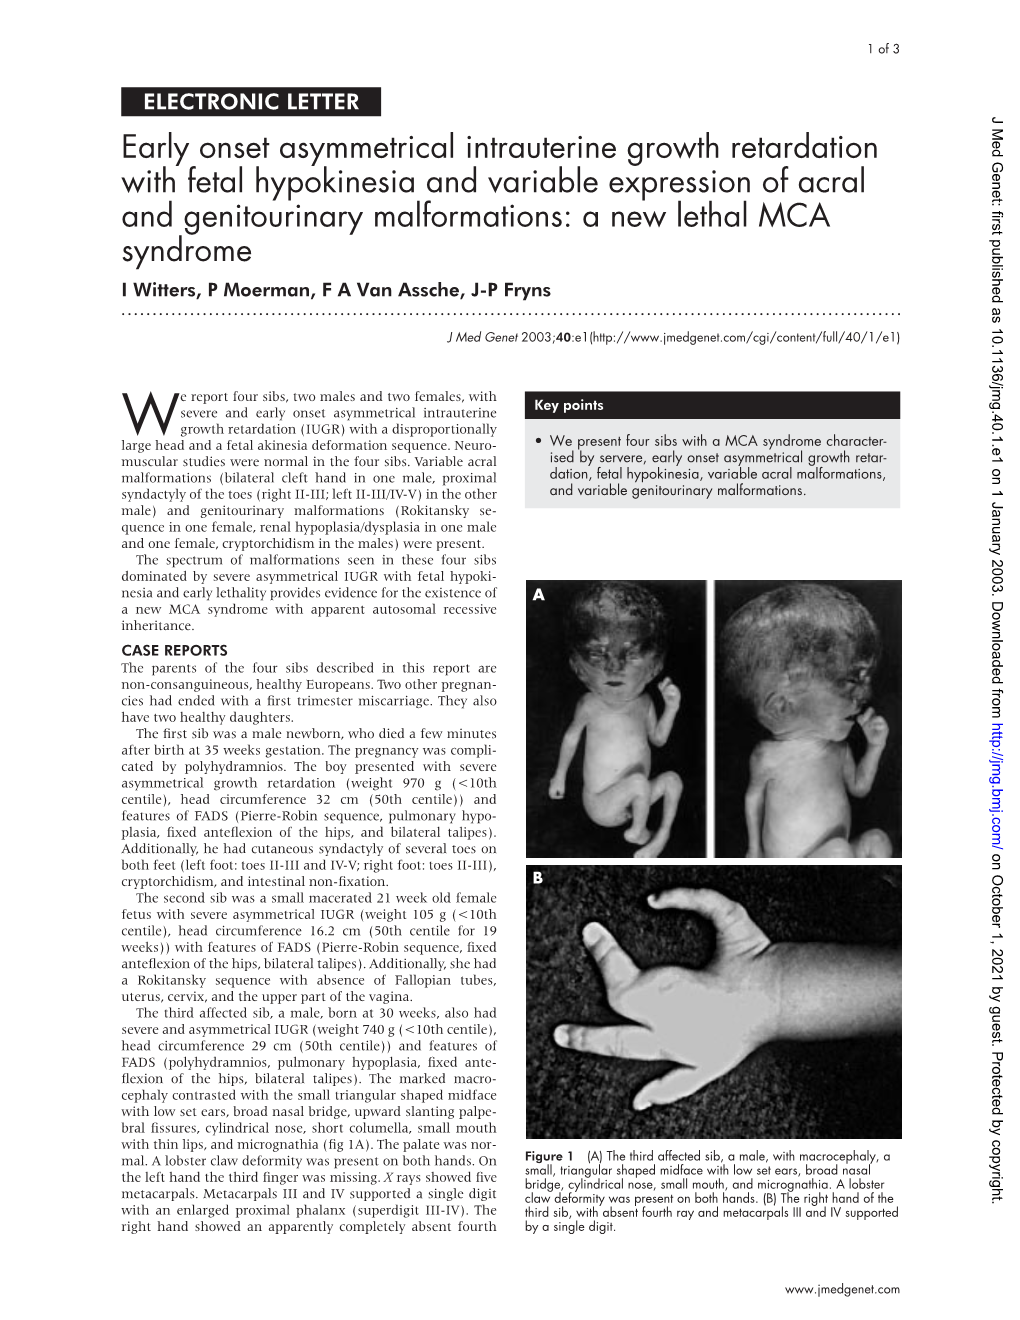 Early Onset Asymmetrical Intrauterine Growth Retardation with Fetal